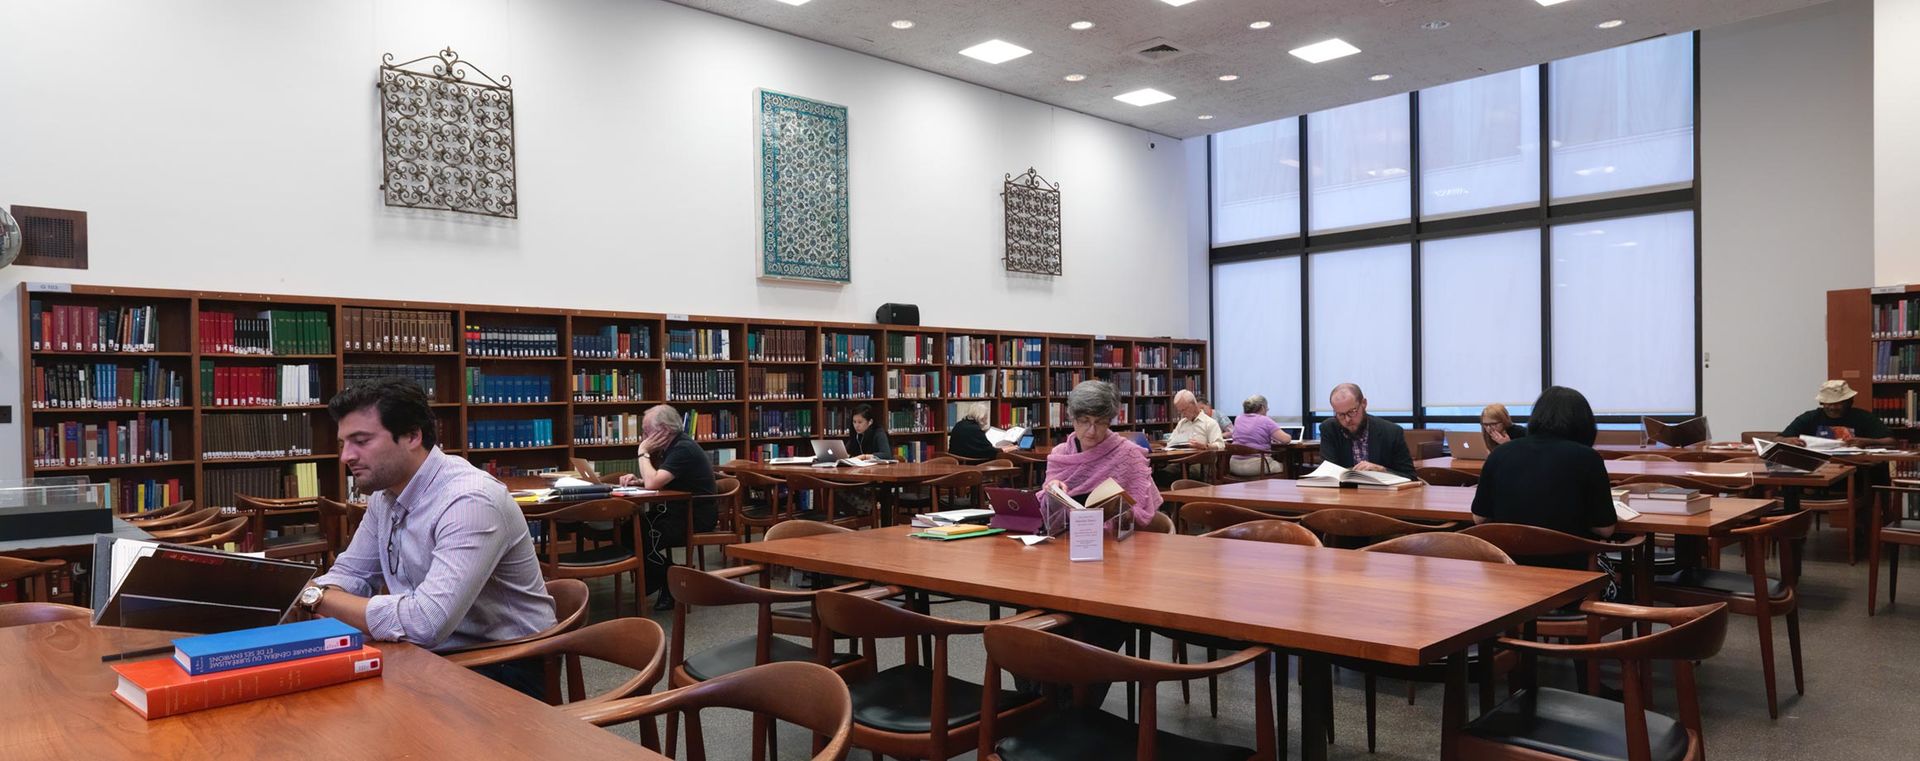 A large, brightly lit room in a library lined with shelves of books; the center has long rectangular wooden tables and chairs where researchers work.